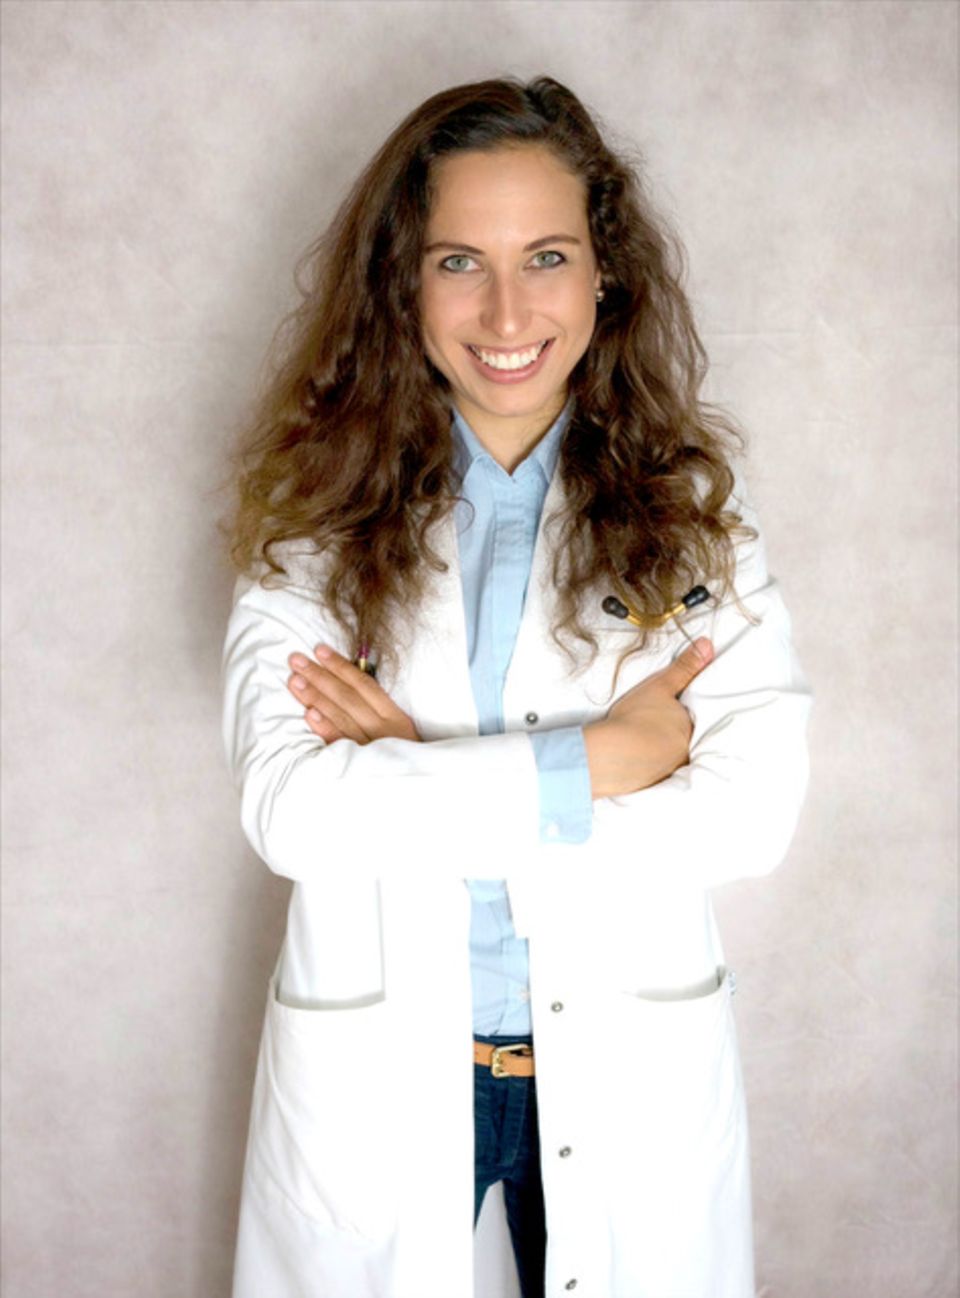 Dr.  med.  Celine Schlager works as a doctor in a children's clinic and is a mother herself.  That's why she knows exactly what worries and fears parents and other family members have when it comes to their offspring.  She has built a large community on Instagram with more than 60,000 followers.  In her courses and consultations she tries to give answers and allay omnipresent fears.